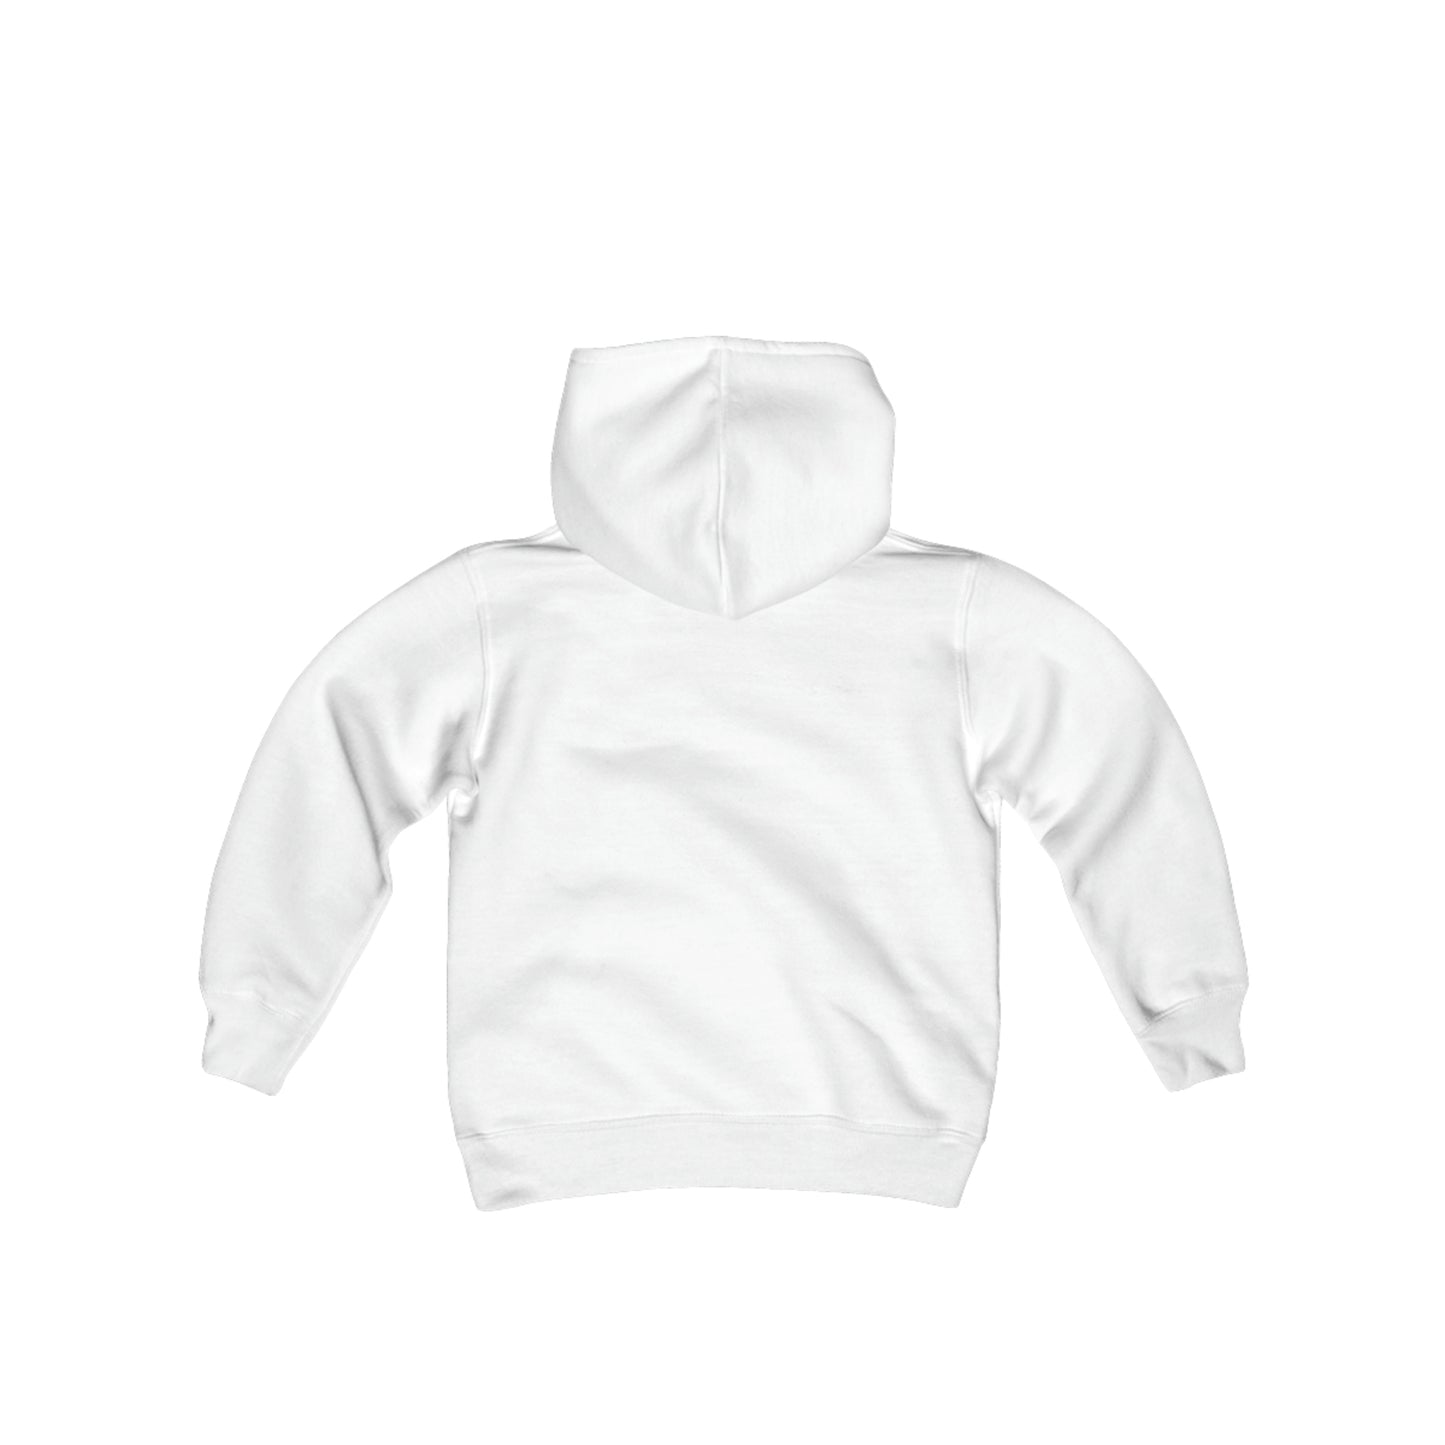 "Super Cool" Collage - Youth Heavy Blend Hooded Sweatshirt